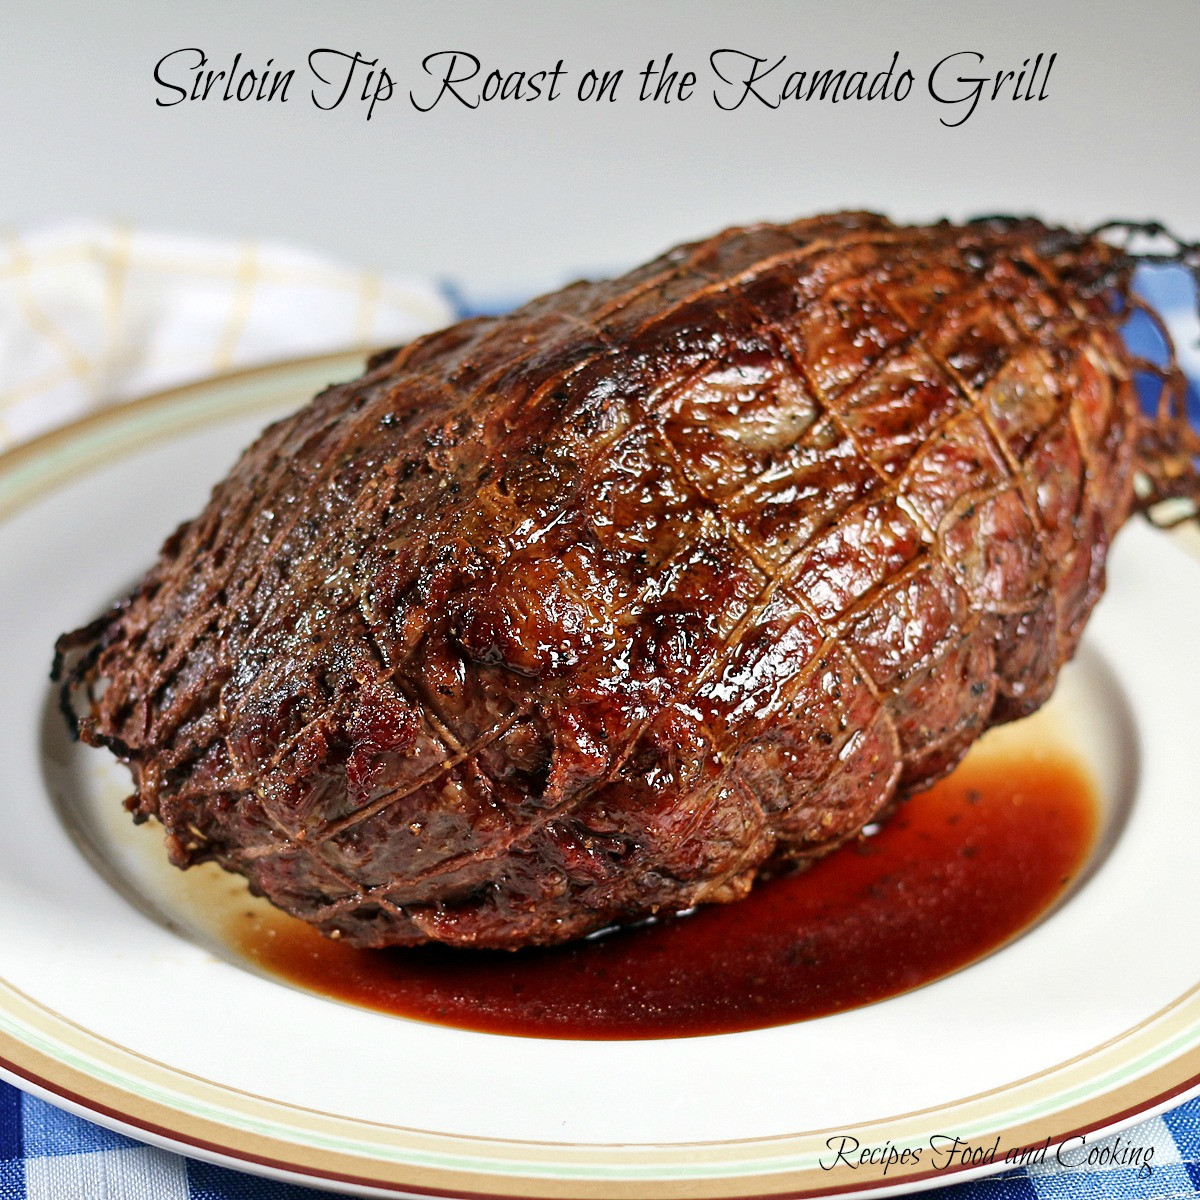 Sirloin Beef Tips Recipe
 Sirloin Tip Roast on the Kamado Grill Recipes Food and